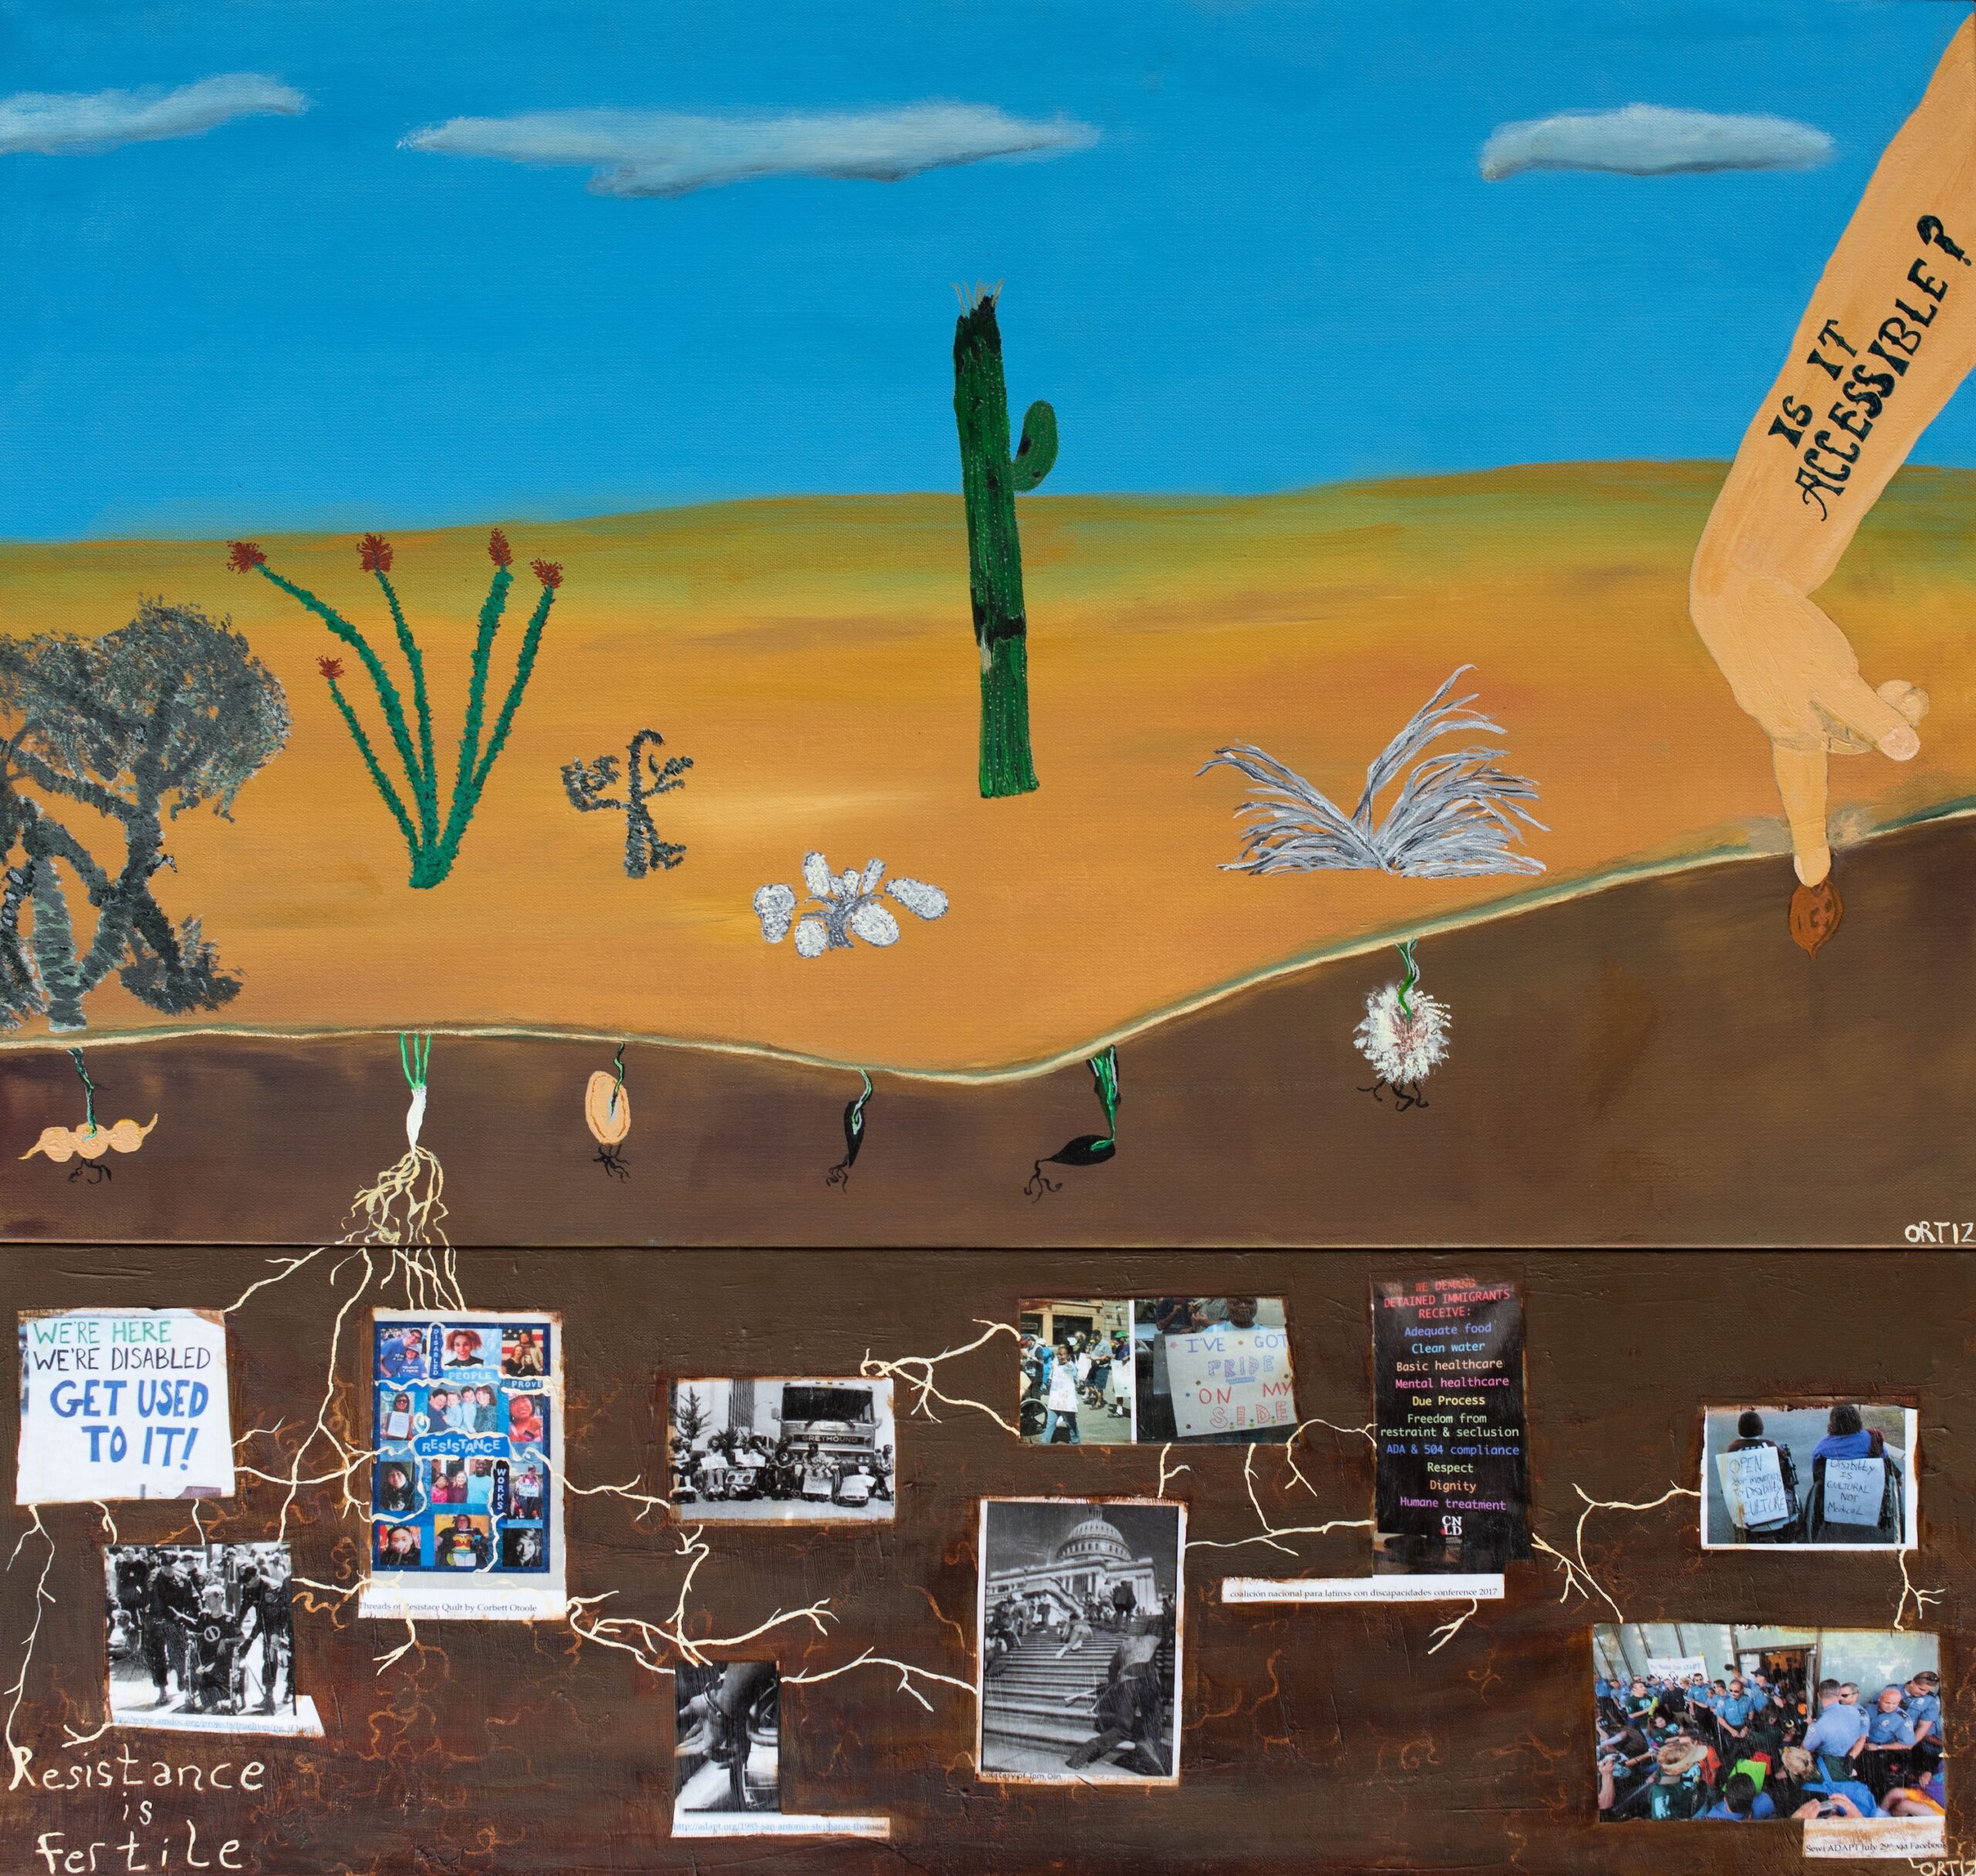 Painting shows landscape with 6 cacti, 5 dead, one alive. Below ground sprouts dead roots from each seed except for the alive plant. To the side is a disabled arm and hand planting a seed. On the arm the words “It is accessible?” are written. Lower painting shows an underground scene where roots from the living cacti wrap around connecting images of disability activism. A sign says, “we’re here we’re disabled get used to it!” Another is a photo of the threads of resistance quilt from Corbett Otoole showing photos of disabled people of color. A group protests and blocks an inaccessible bus and disabled people crawl up to the steps of the capitol. In the lower left-hand corner of the painting are the words “Resistance is fertile.”